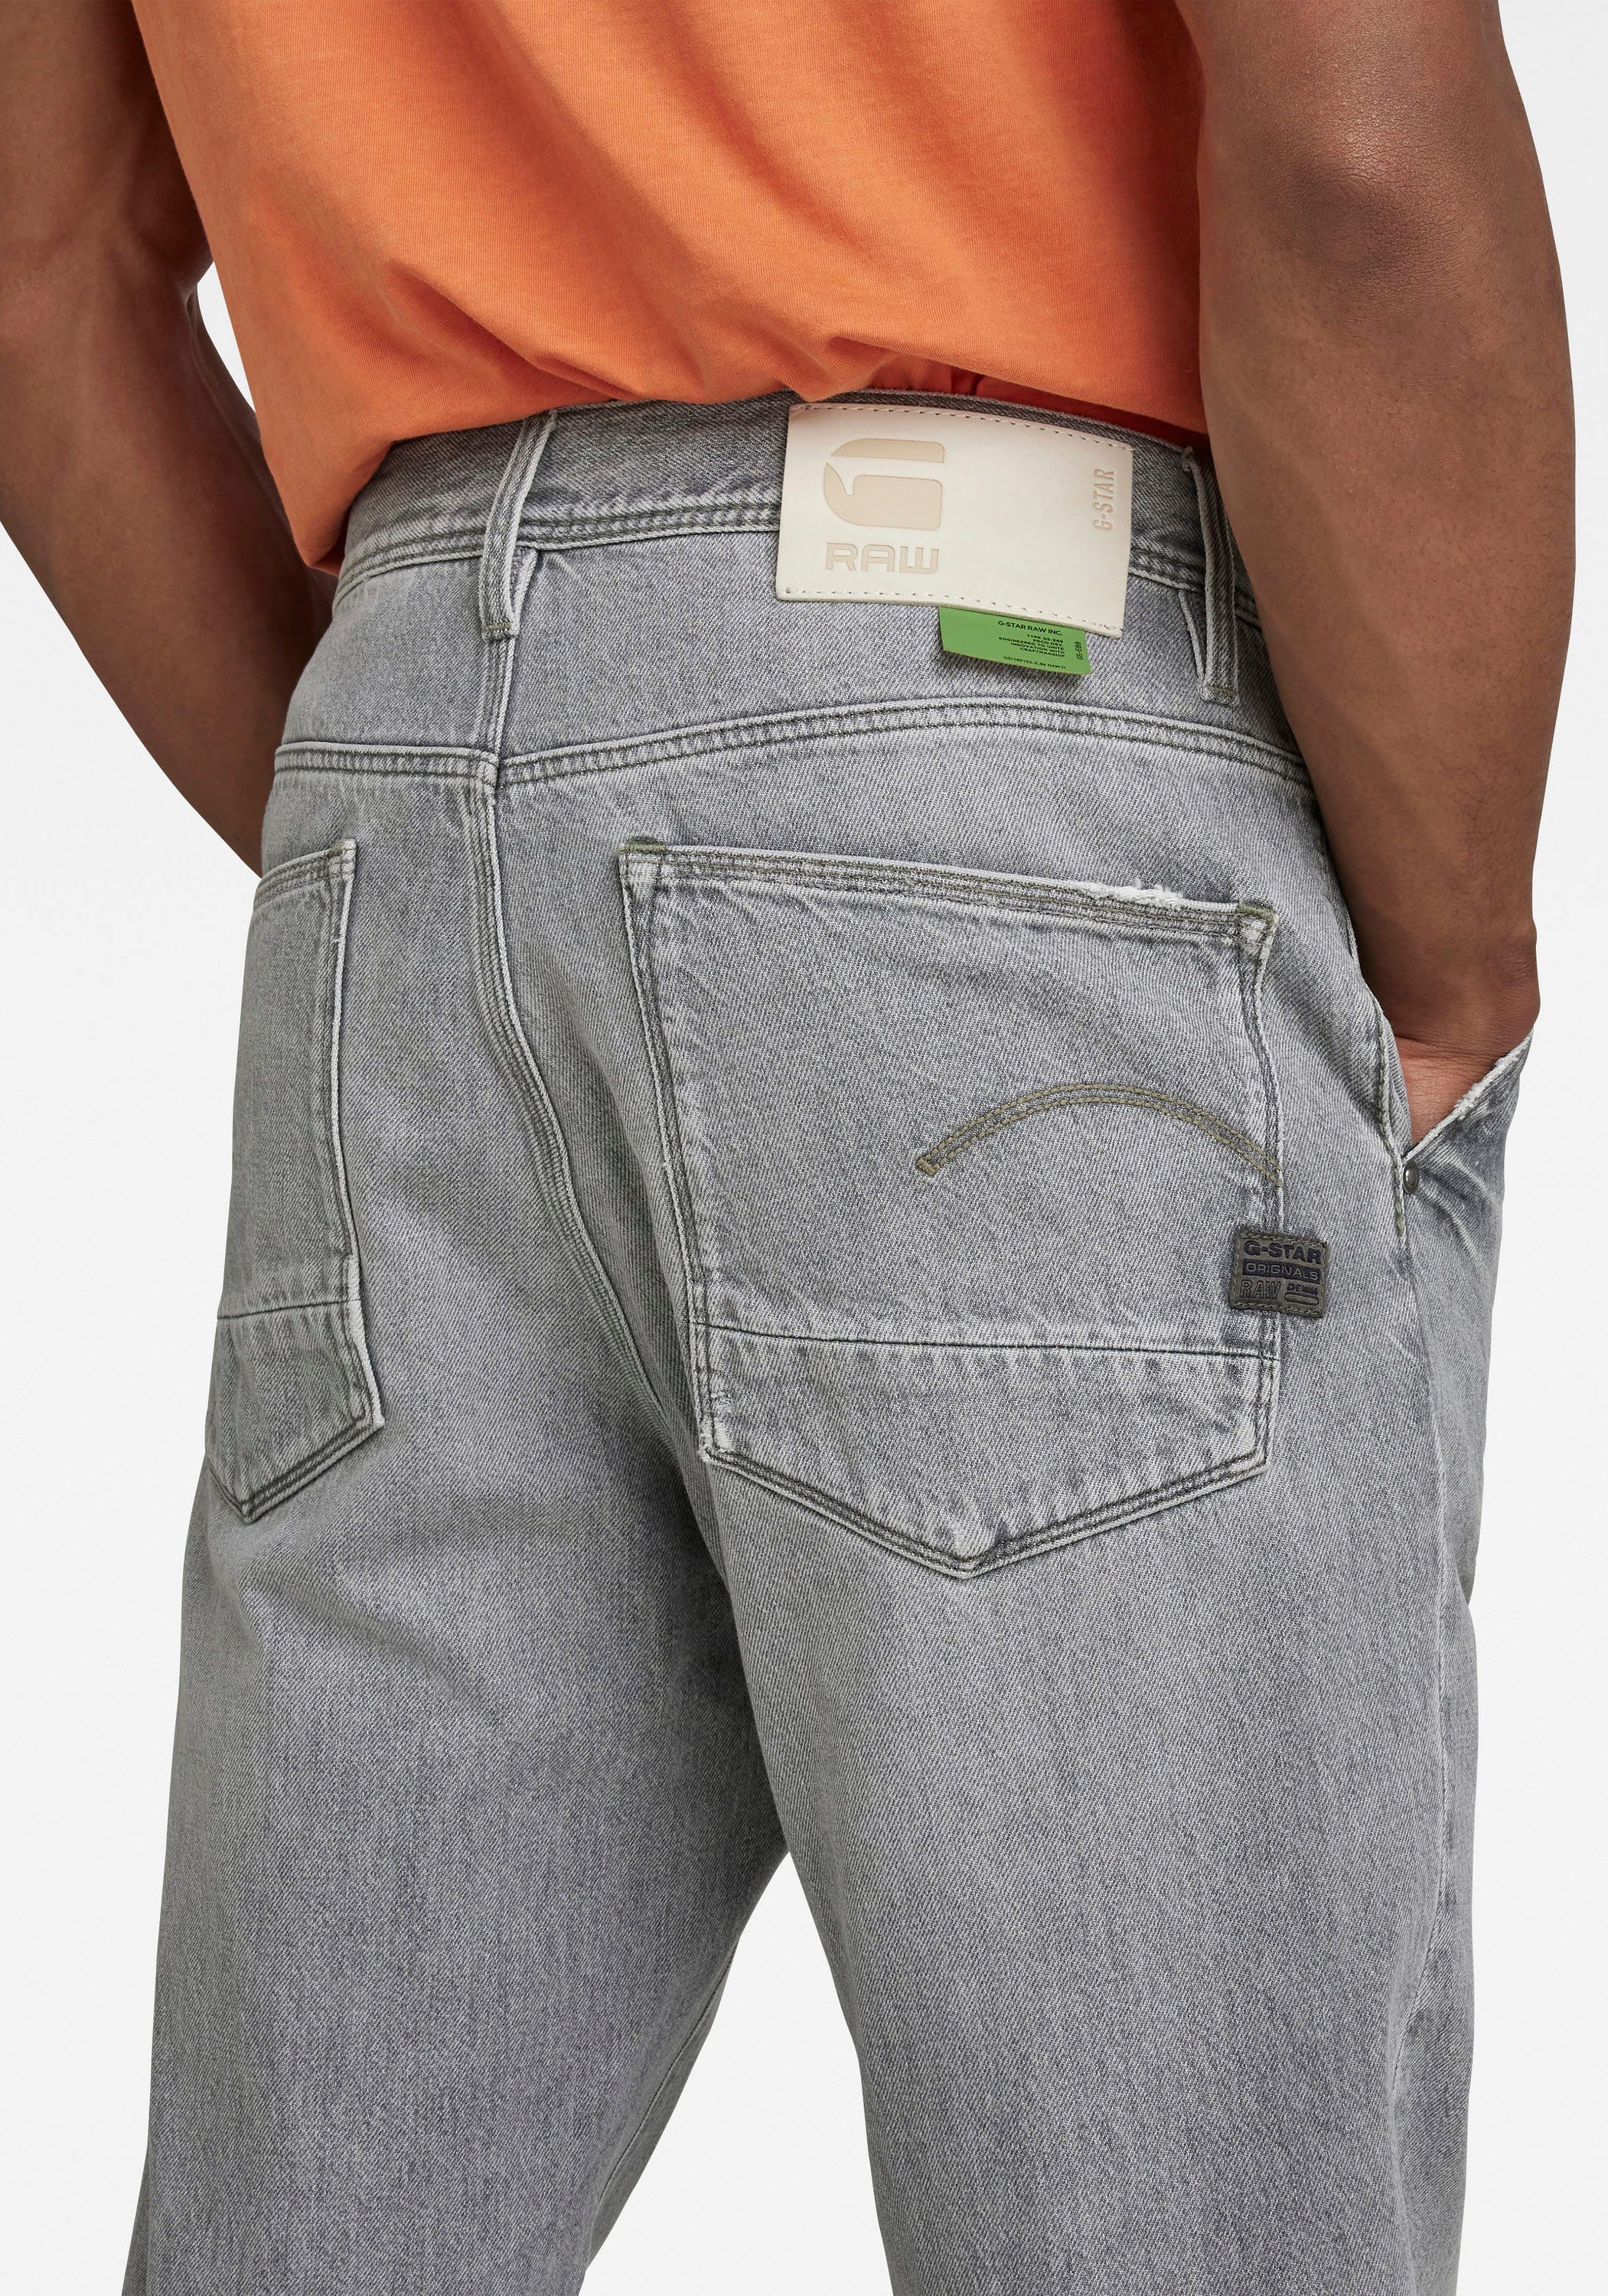 faded RAW G-Star Tapered Tapered-fit-Jeans grey Relaxed Grip 3d